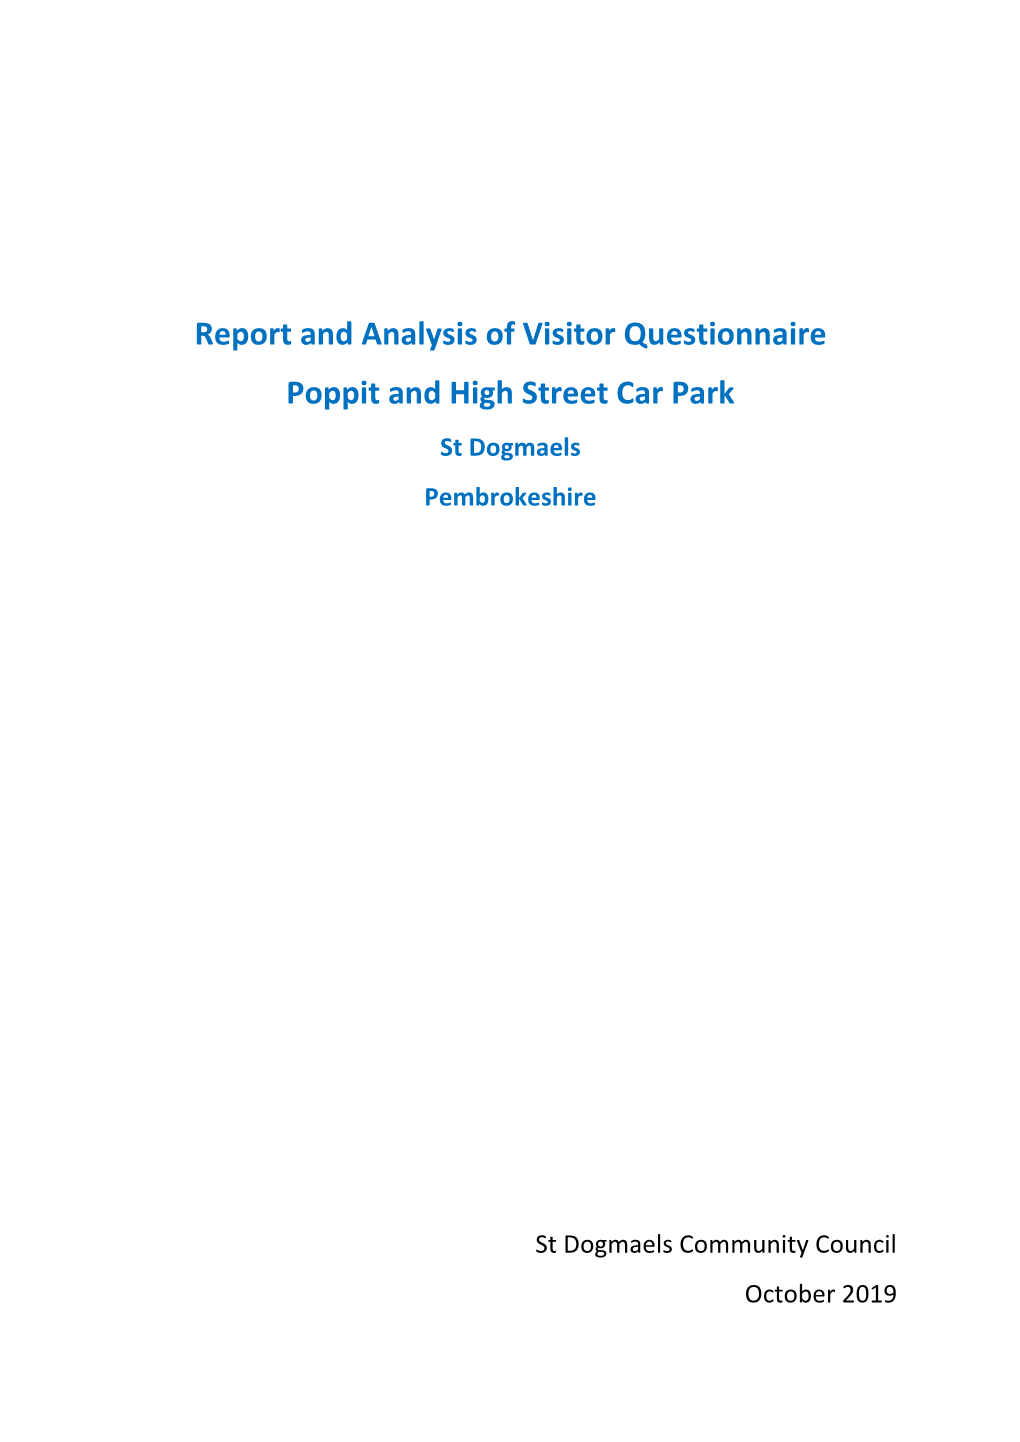 Report and Analysis of Visitor Questionnaire Poppit and High Street Car Park St Dogmaels Pembrokeshire